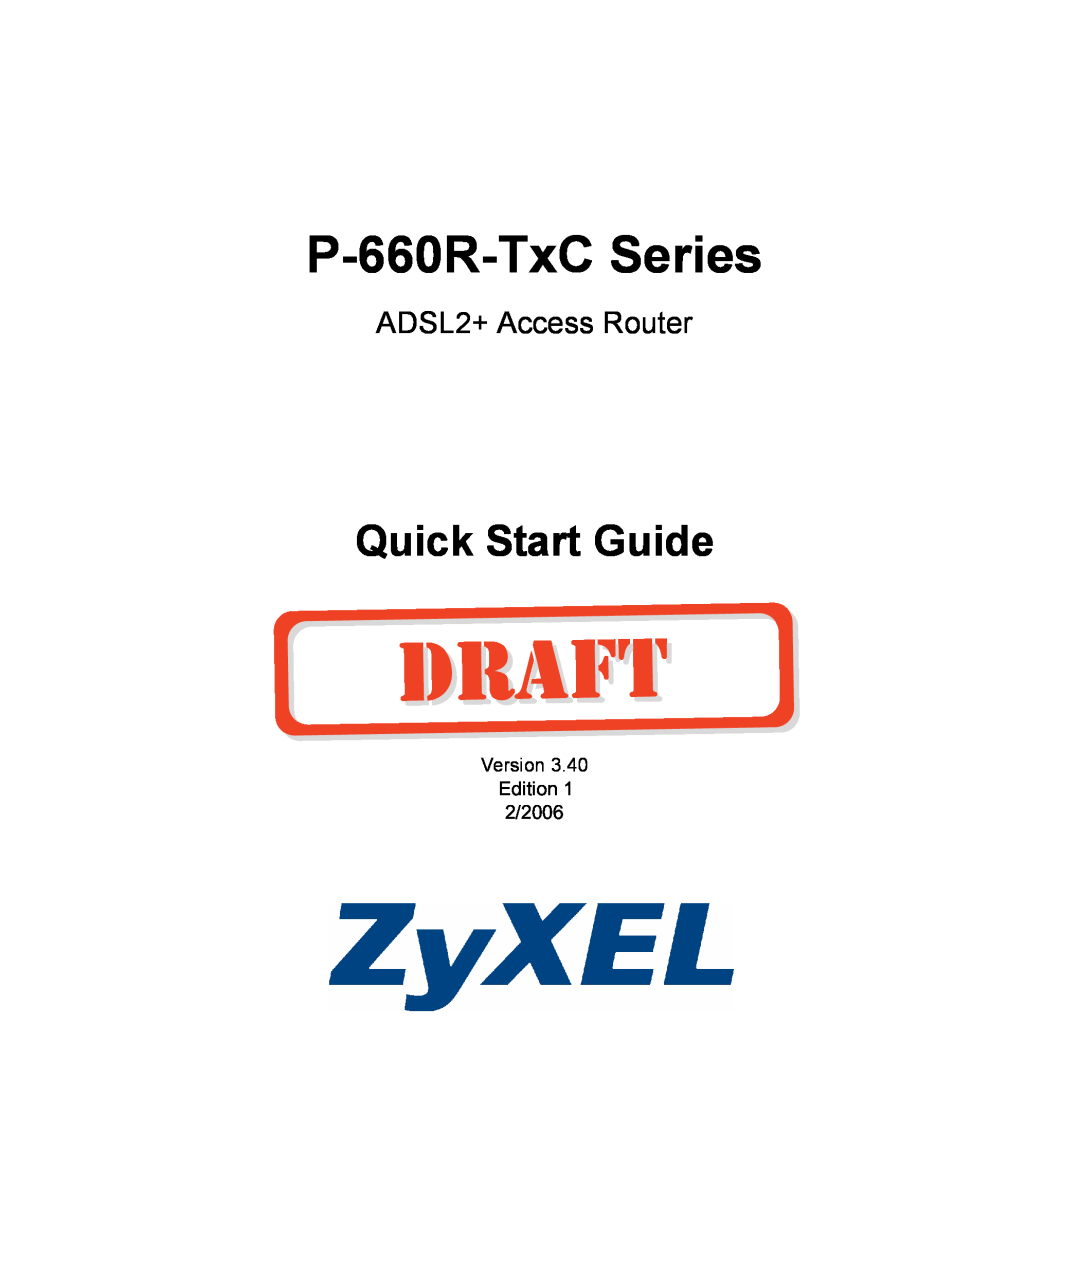 ZyXEL Communications P-660R-T1 v2 quick start P-660R-TxC Series, Quick Start Guide, ADSL2+ Access Router 